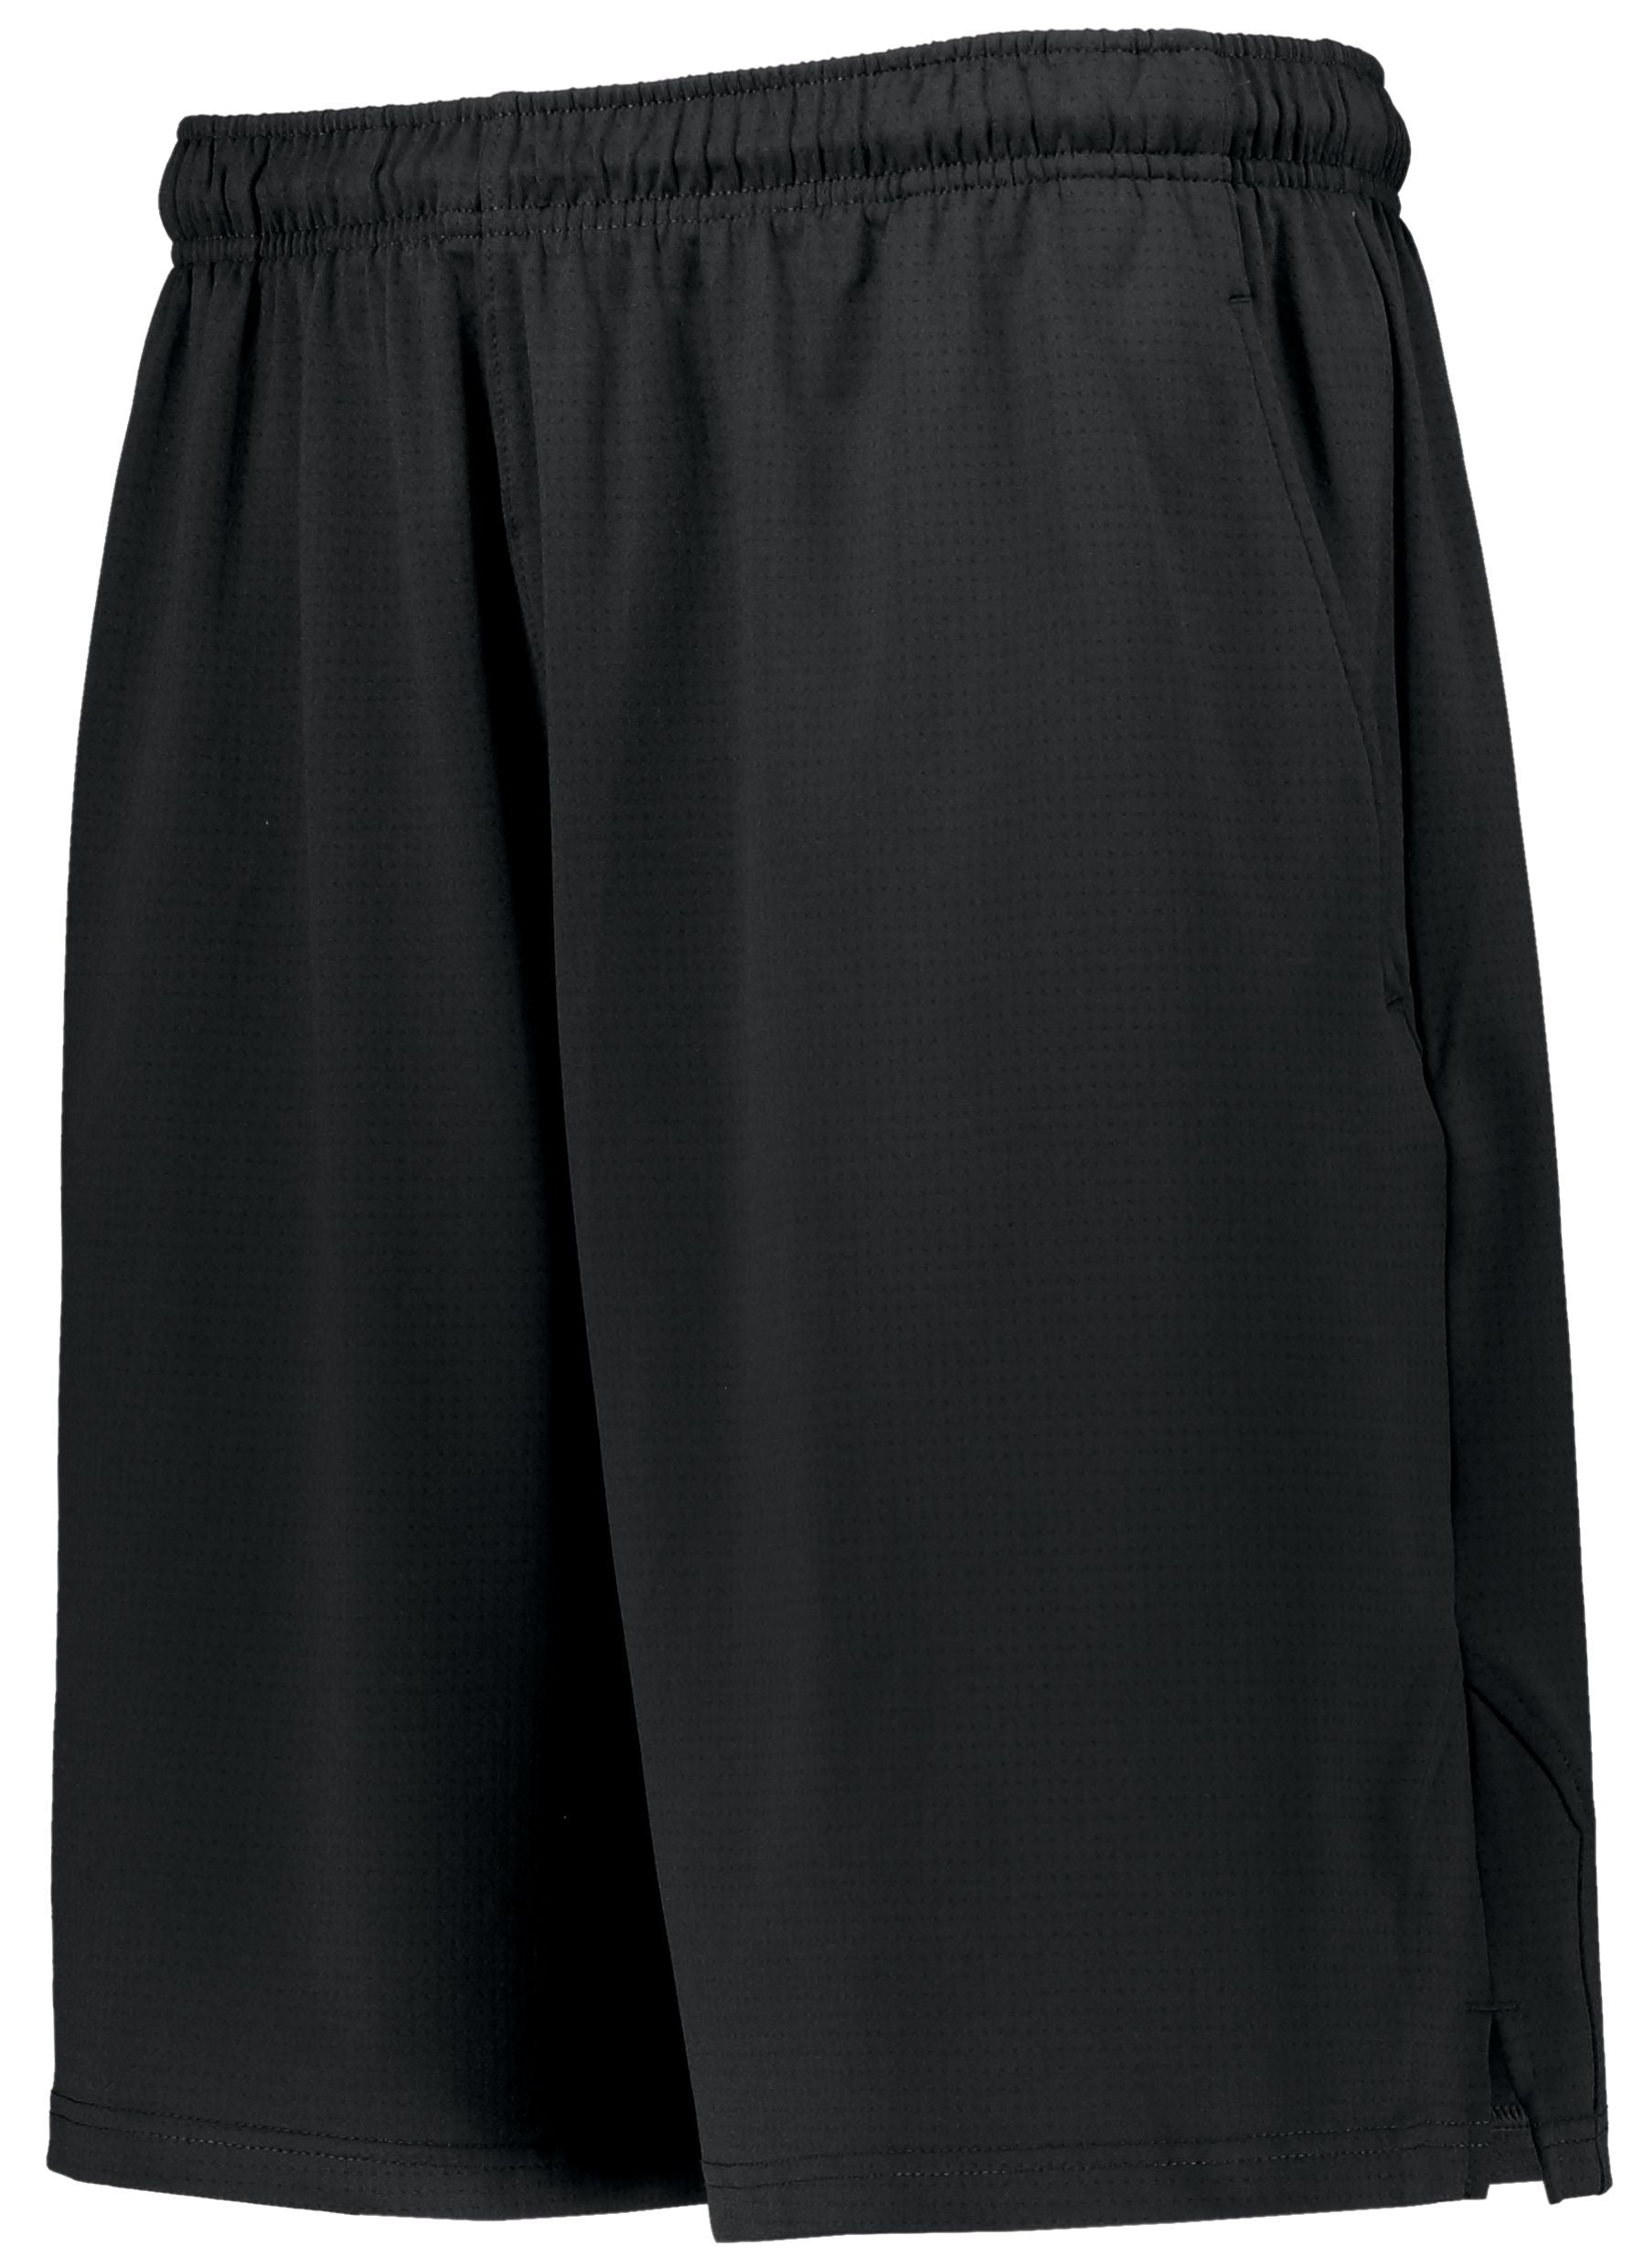 Russell Athletic Team Driven Coaches Shorts